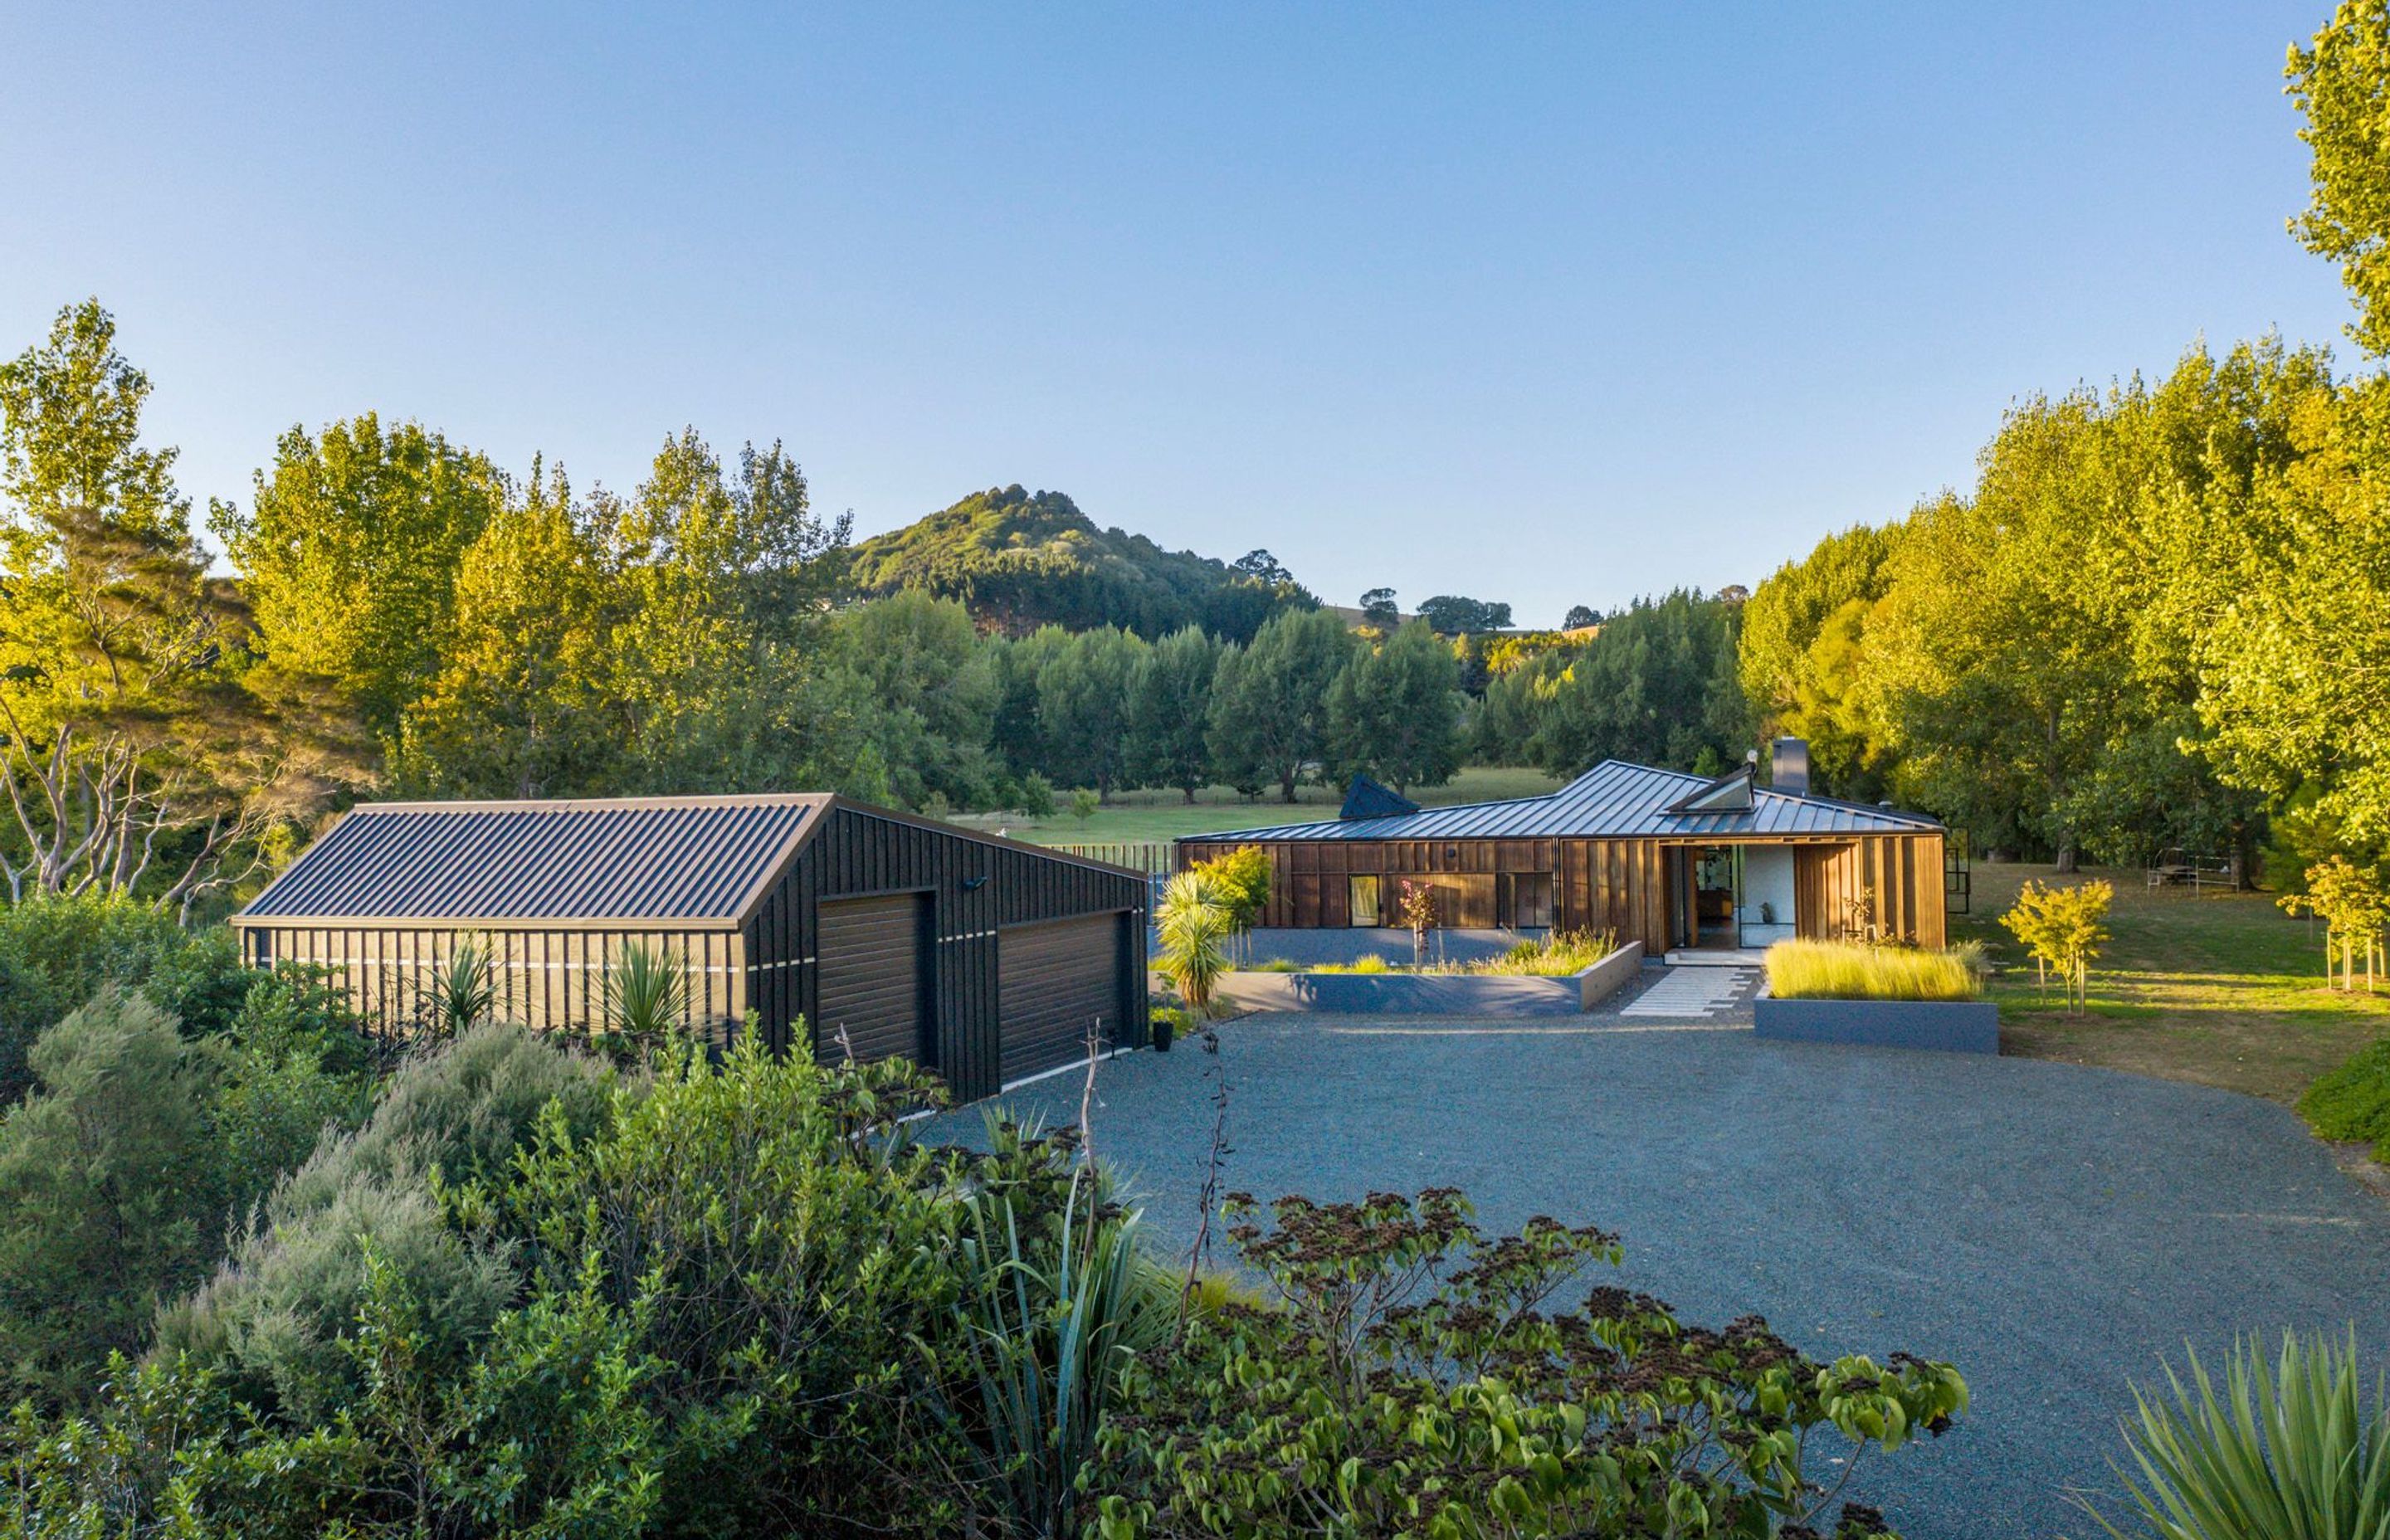 The distinctive roof angles start as soon as you arrive and park beside the garage with its asymmetrical roof, while the roof of Matakana House points towards Sugar Loaf Mountain.